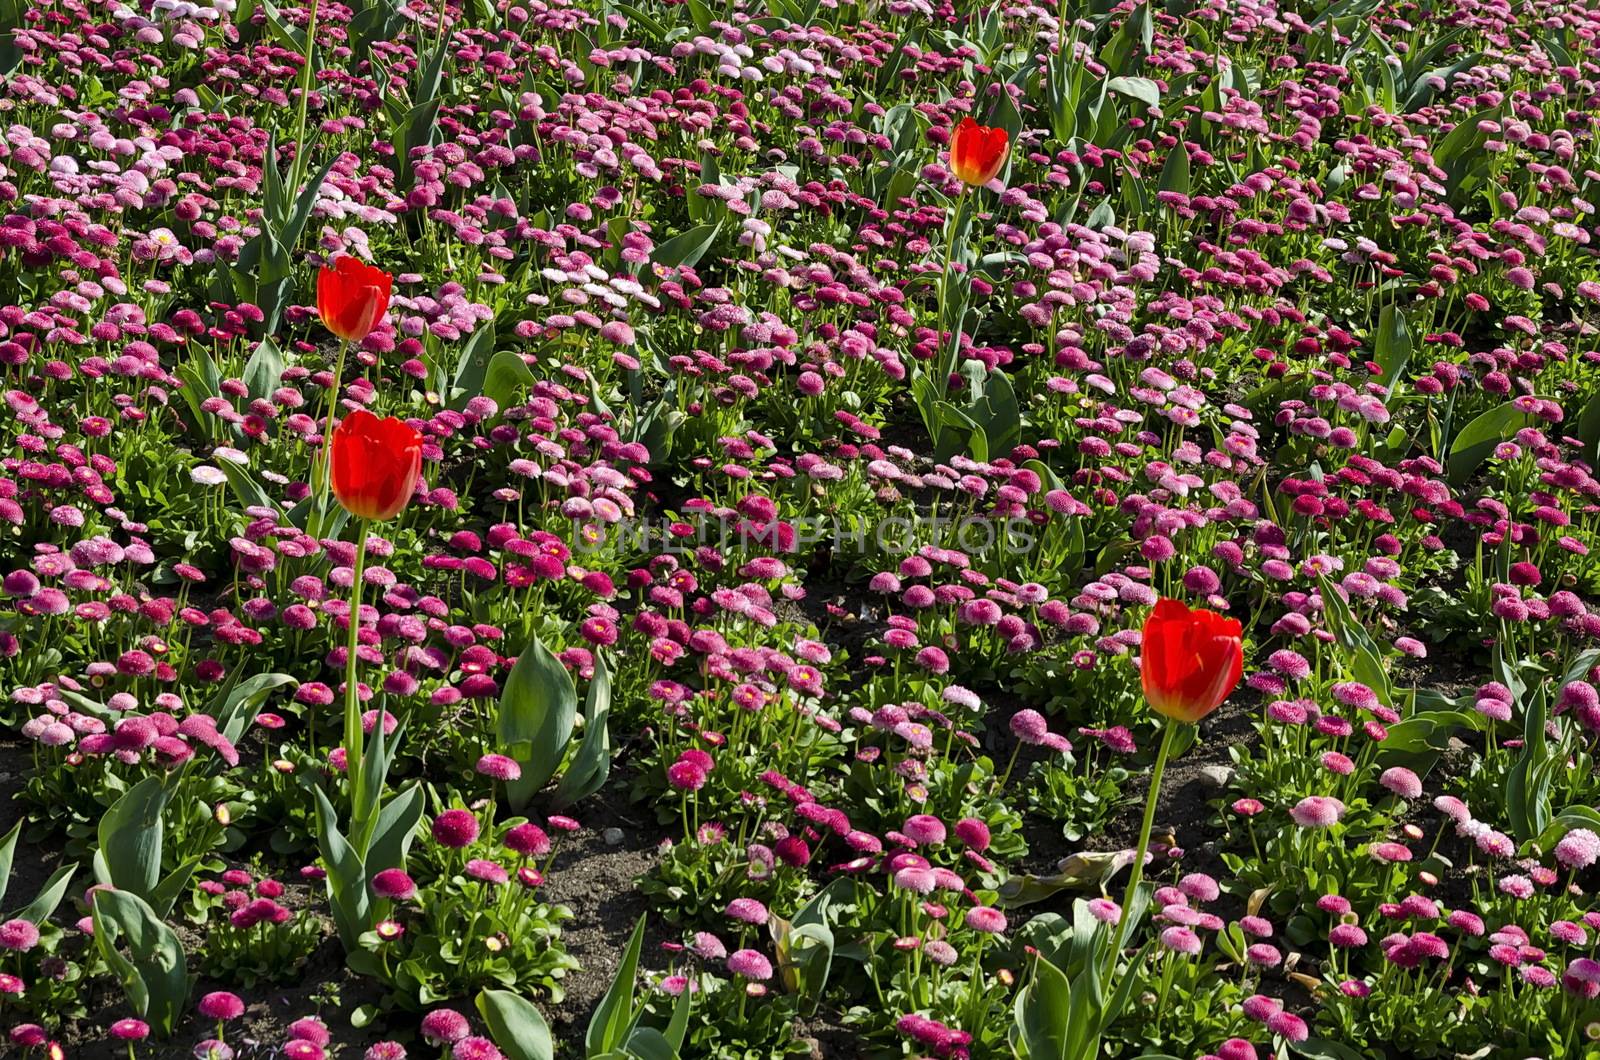 Springtime garden with pink daisies and red tulips in bloom, Sofia, Bulgaria